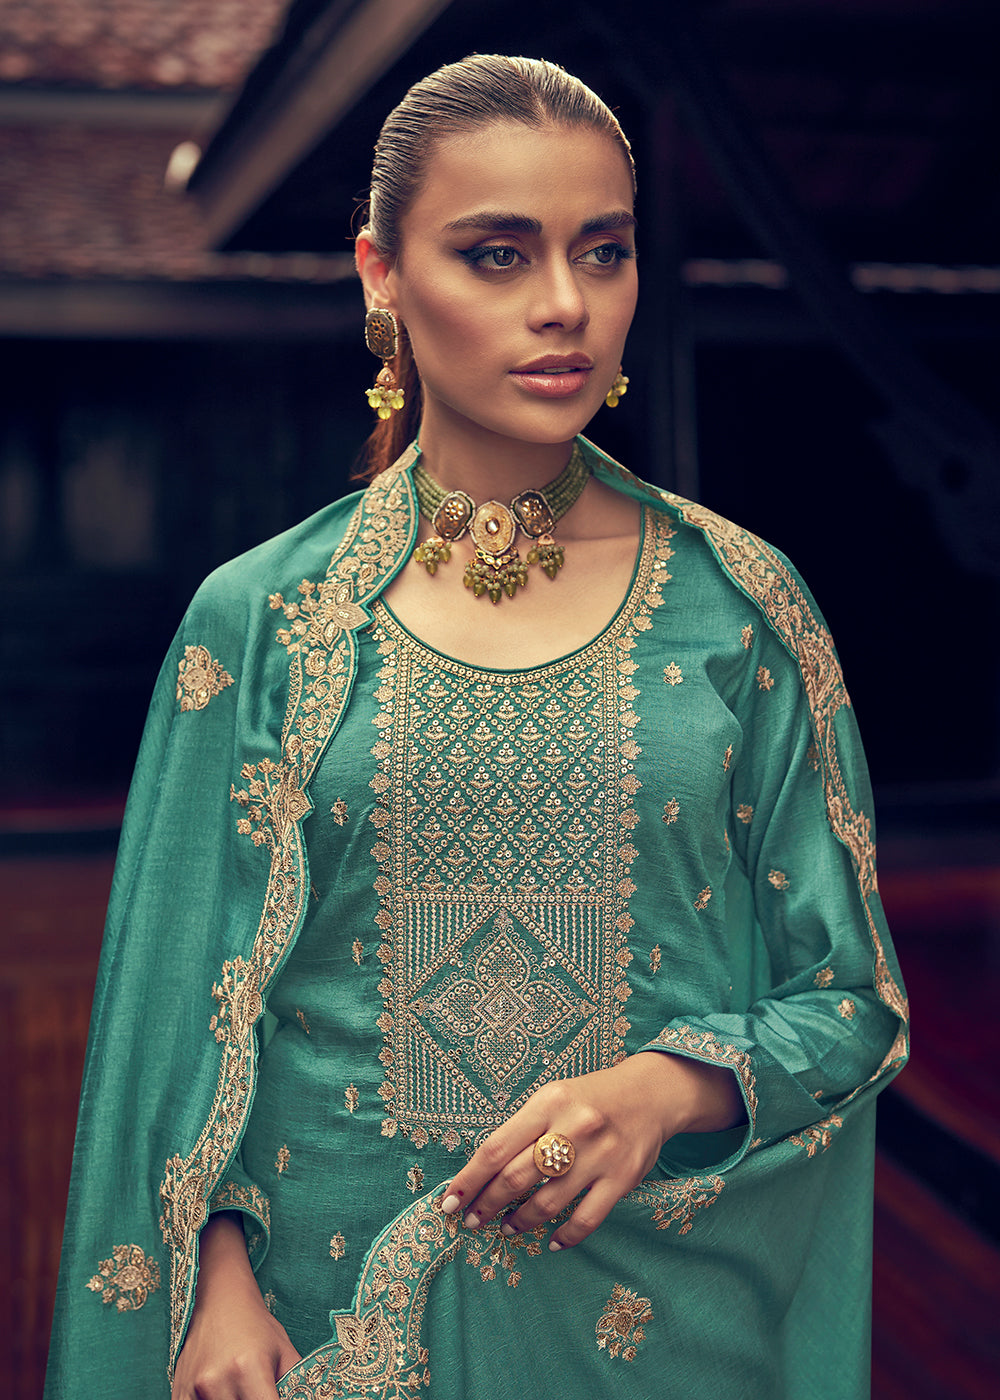 Buy Now Festive Party Alluring Green Embroidered Salwar Kameez Online in USA, UK, Canada, Germany, Australia & Worldwide at Empress Clothing.